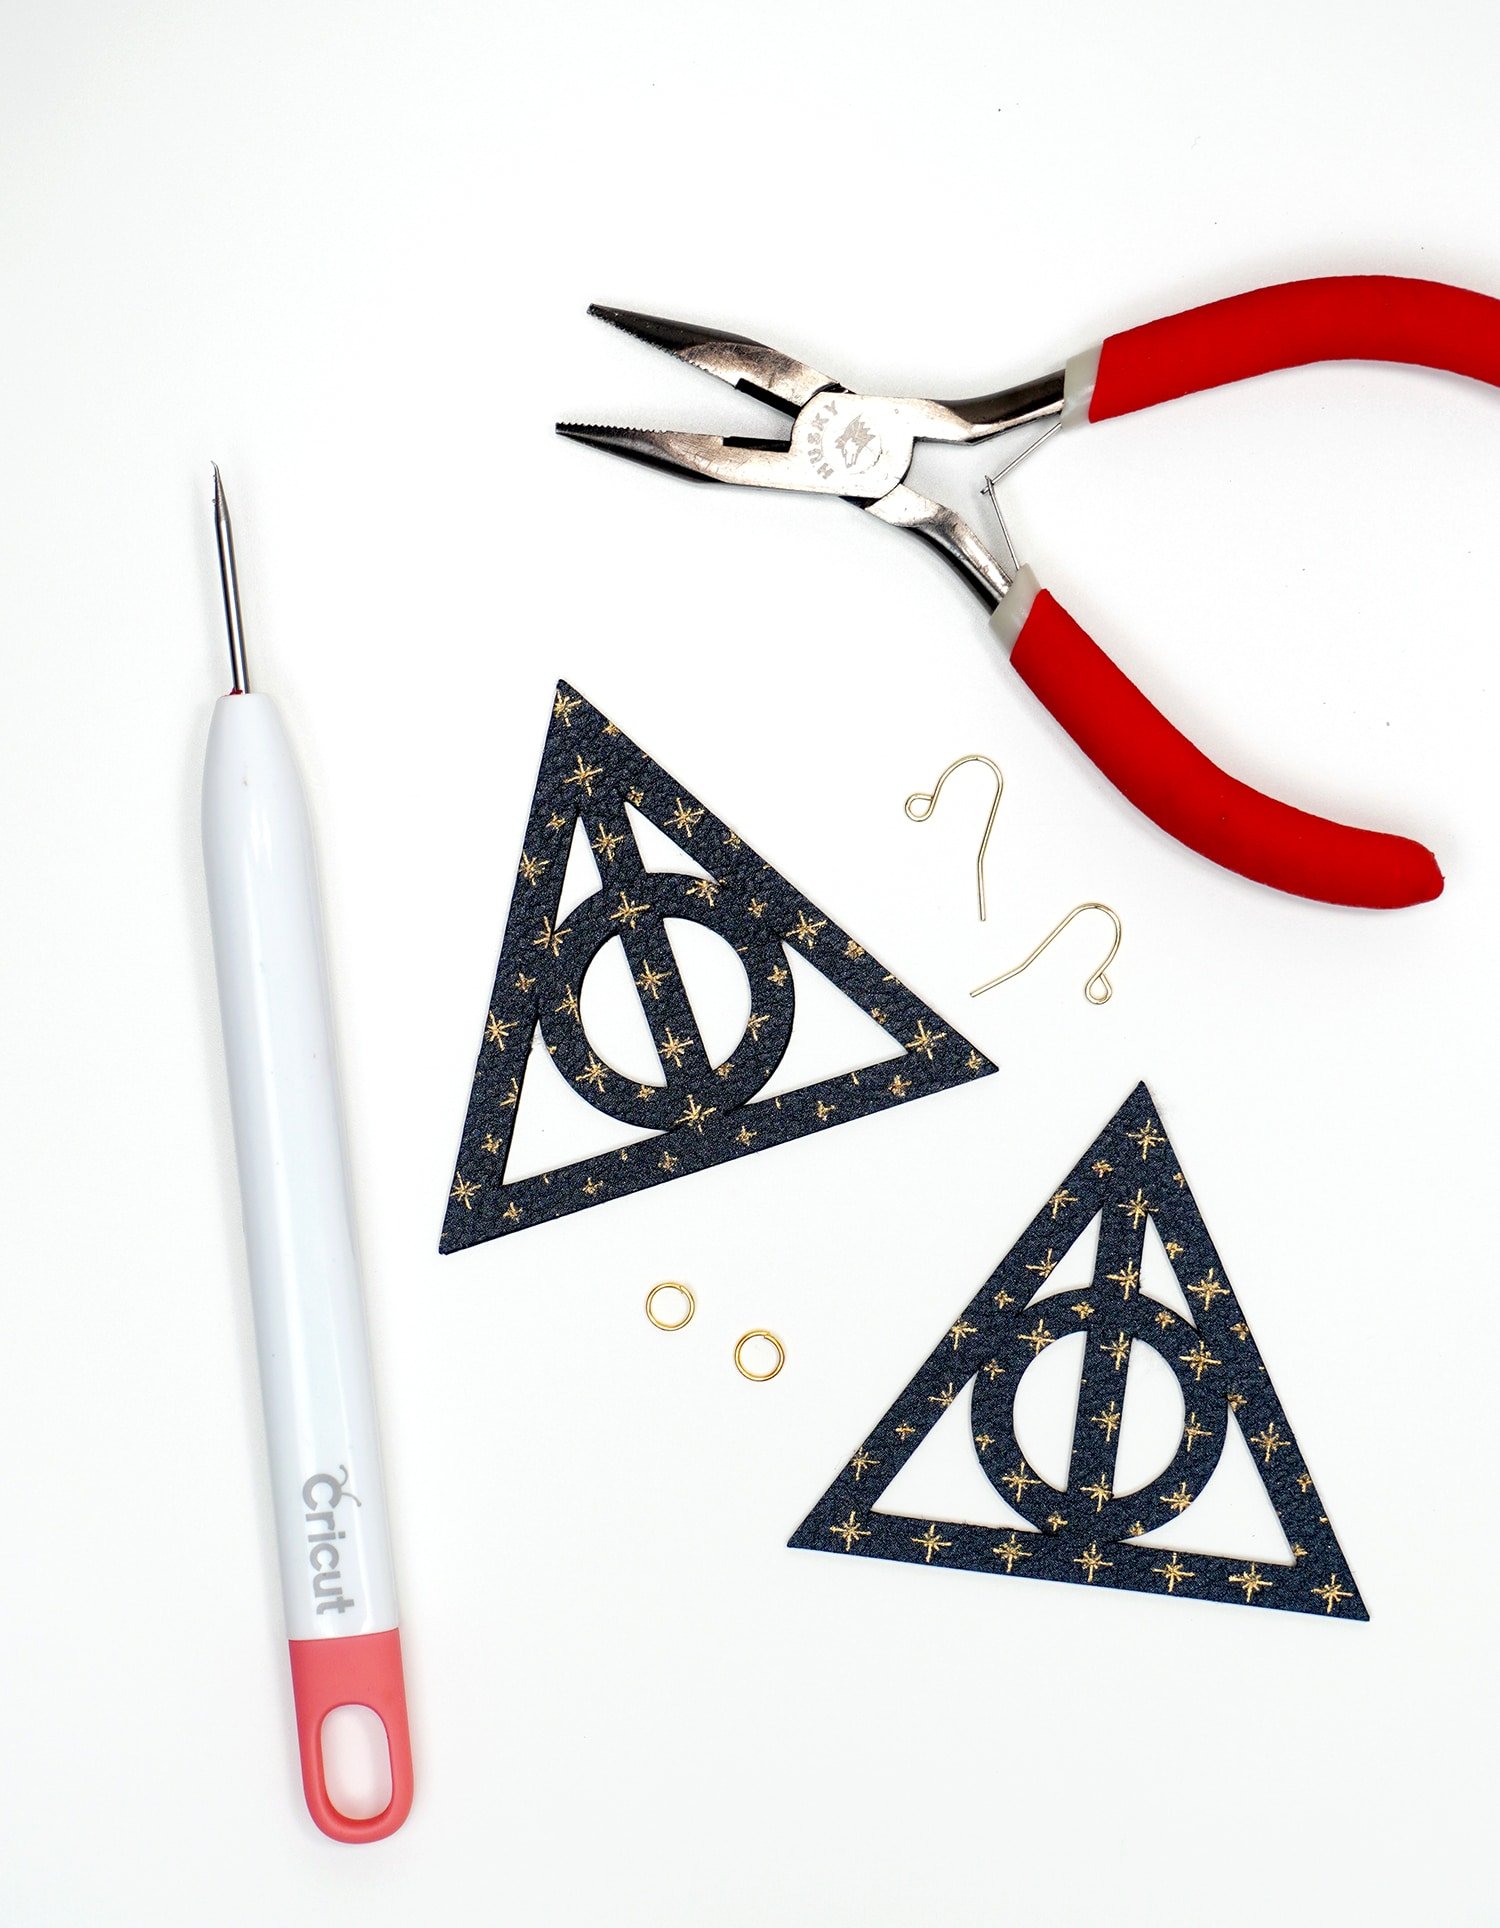 Deathly Hallows shapes on white background surrounded by earring making tools